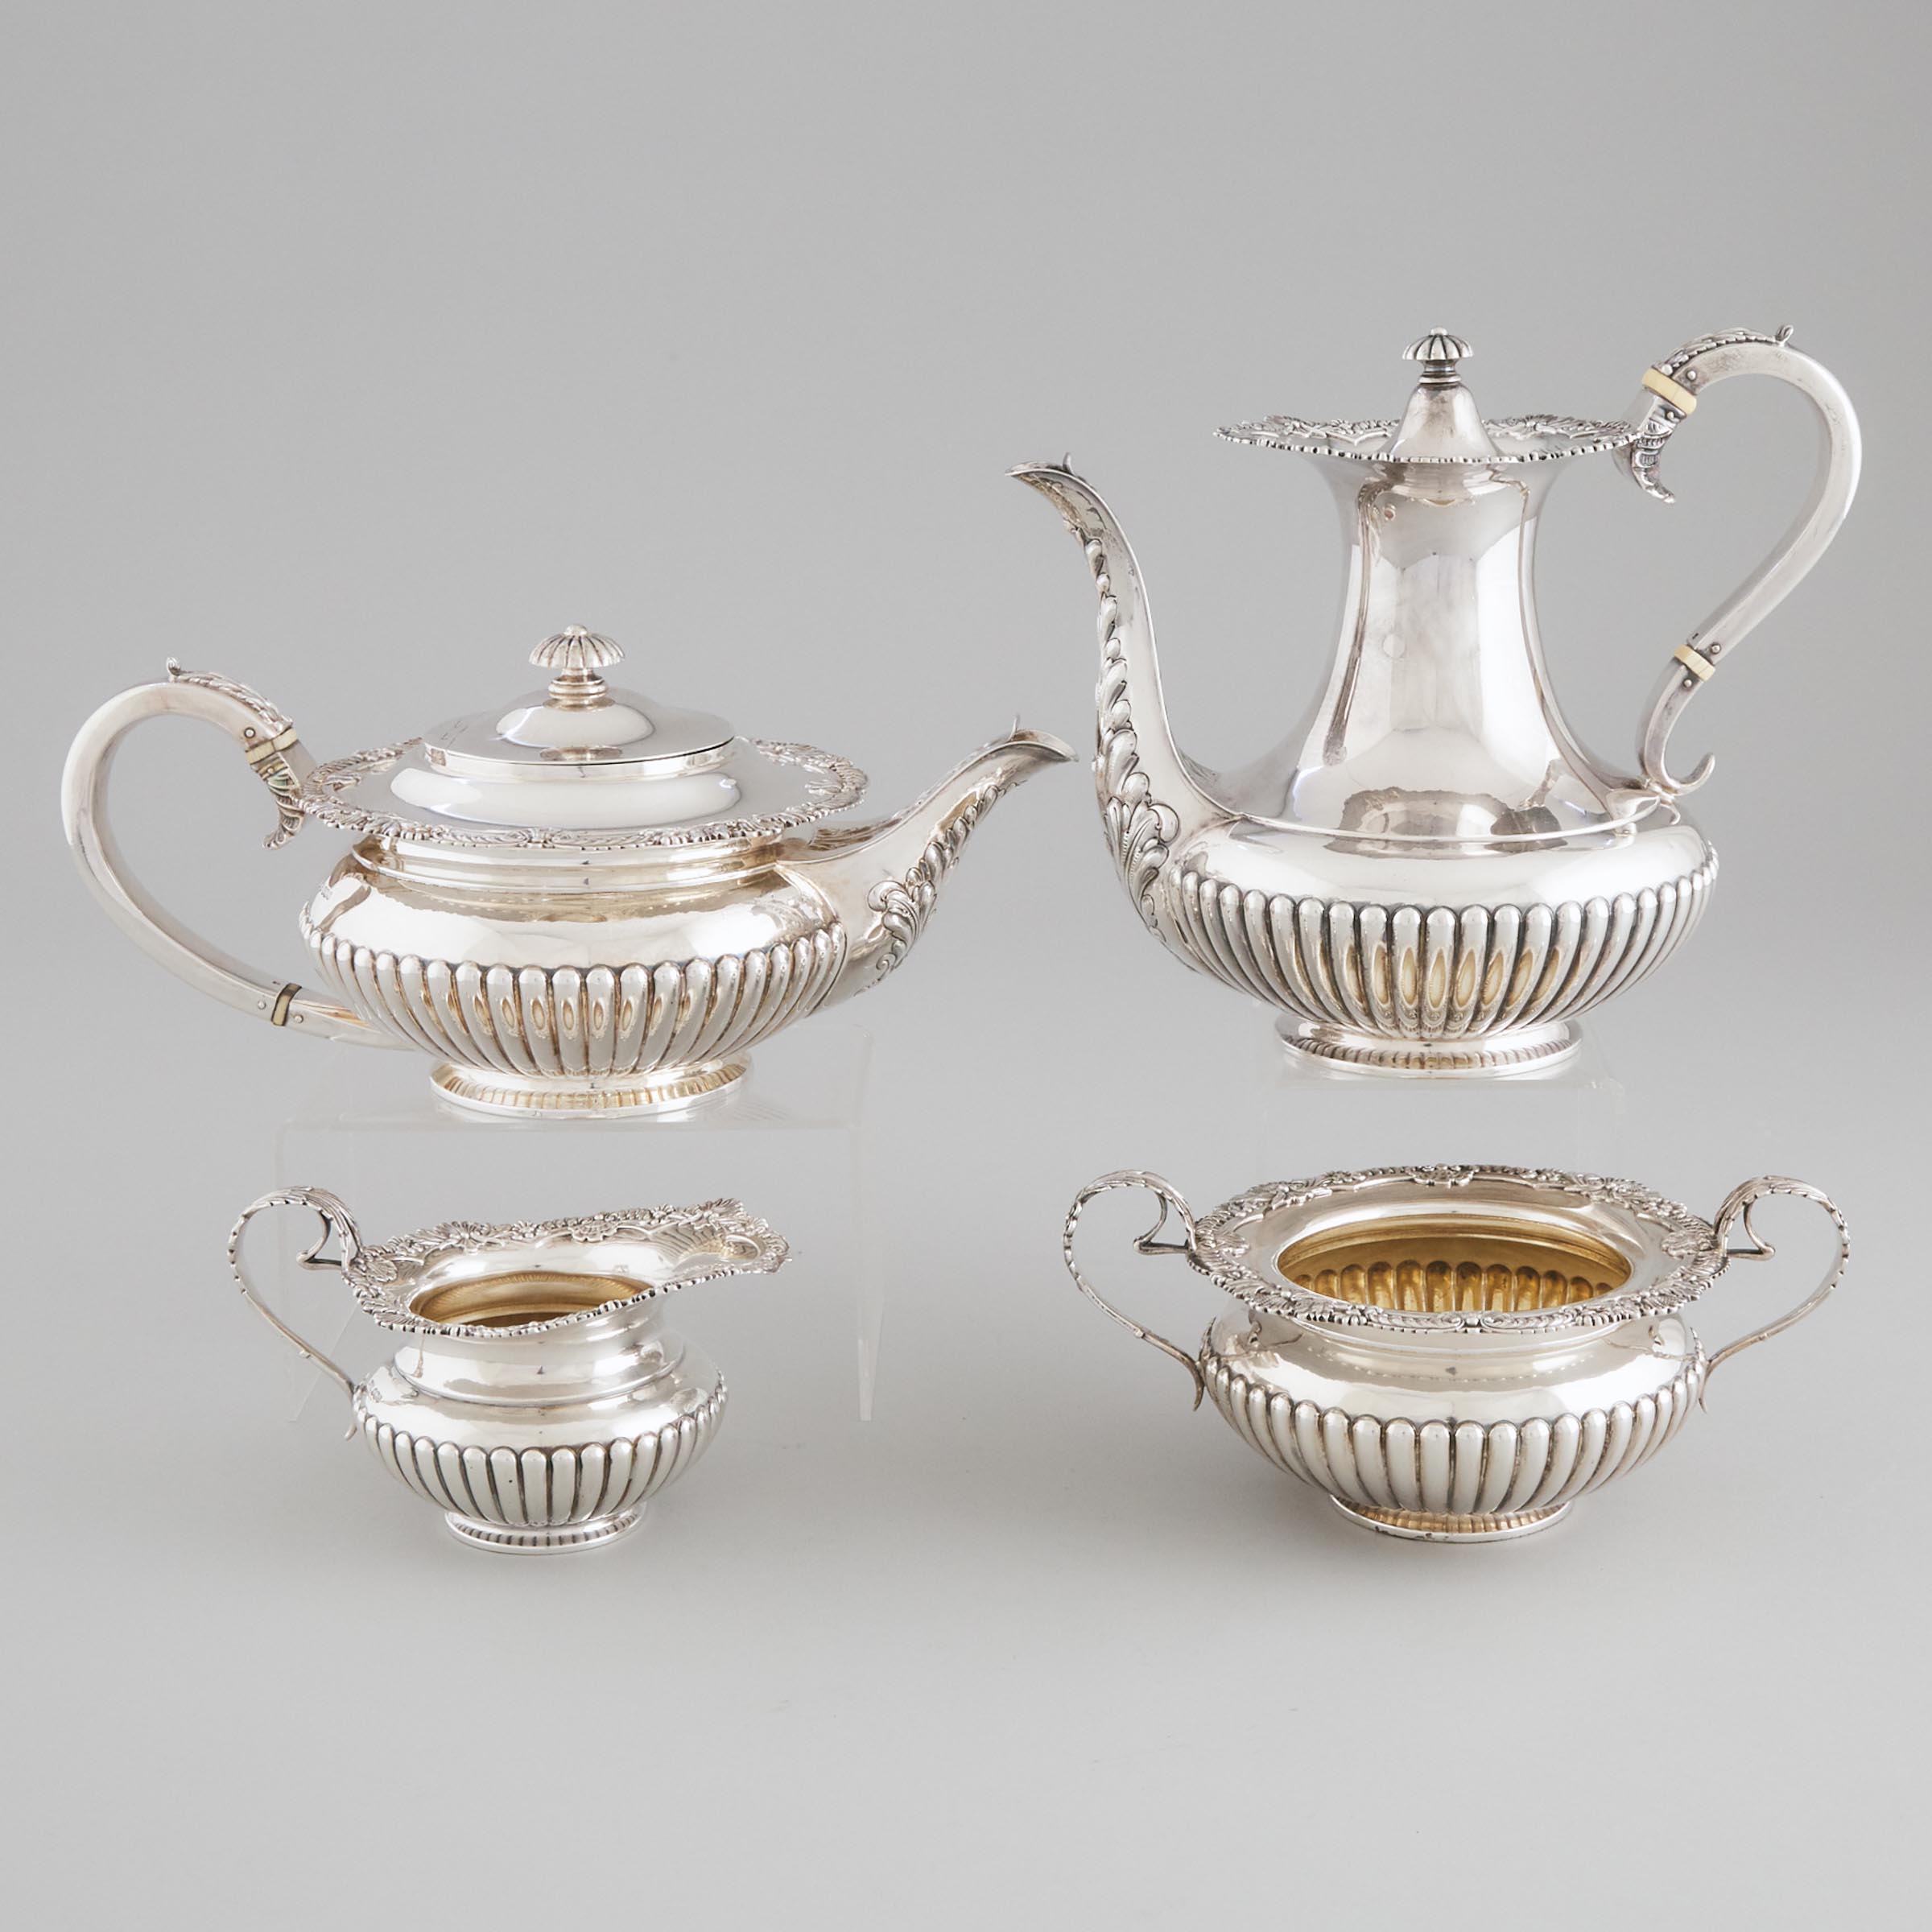 English Silver Tea and Coffee Service, James Dixon & Sons, Sheffield, 1923